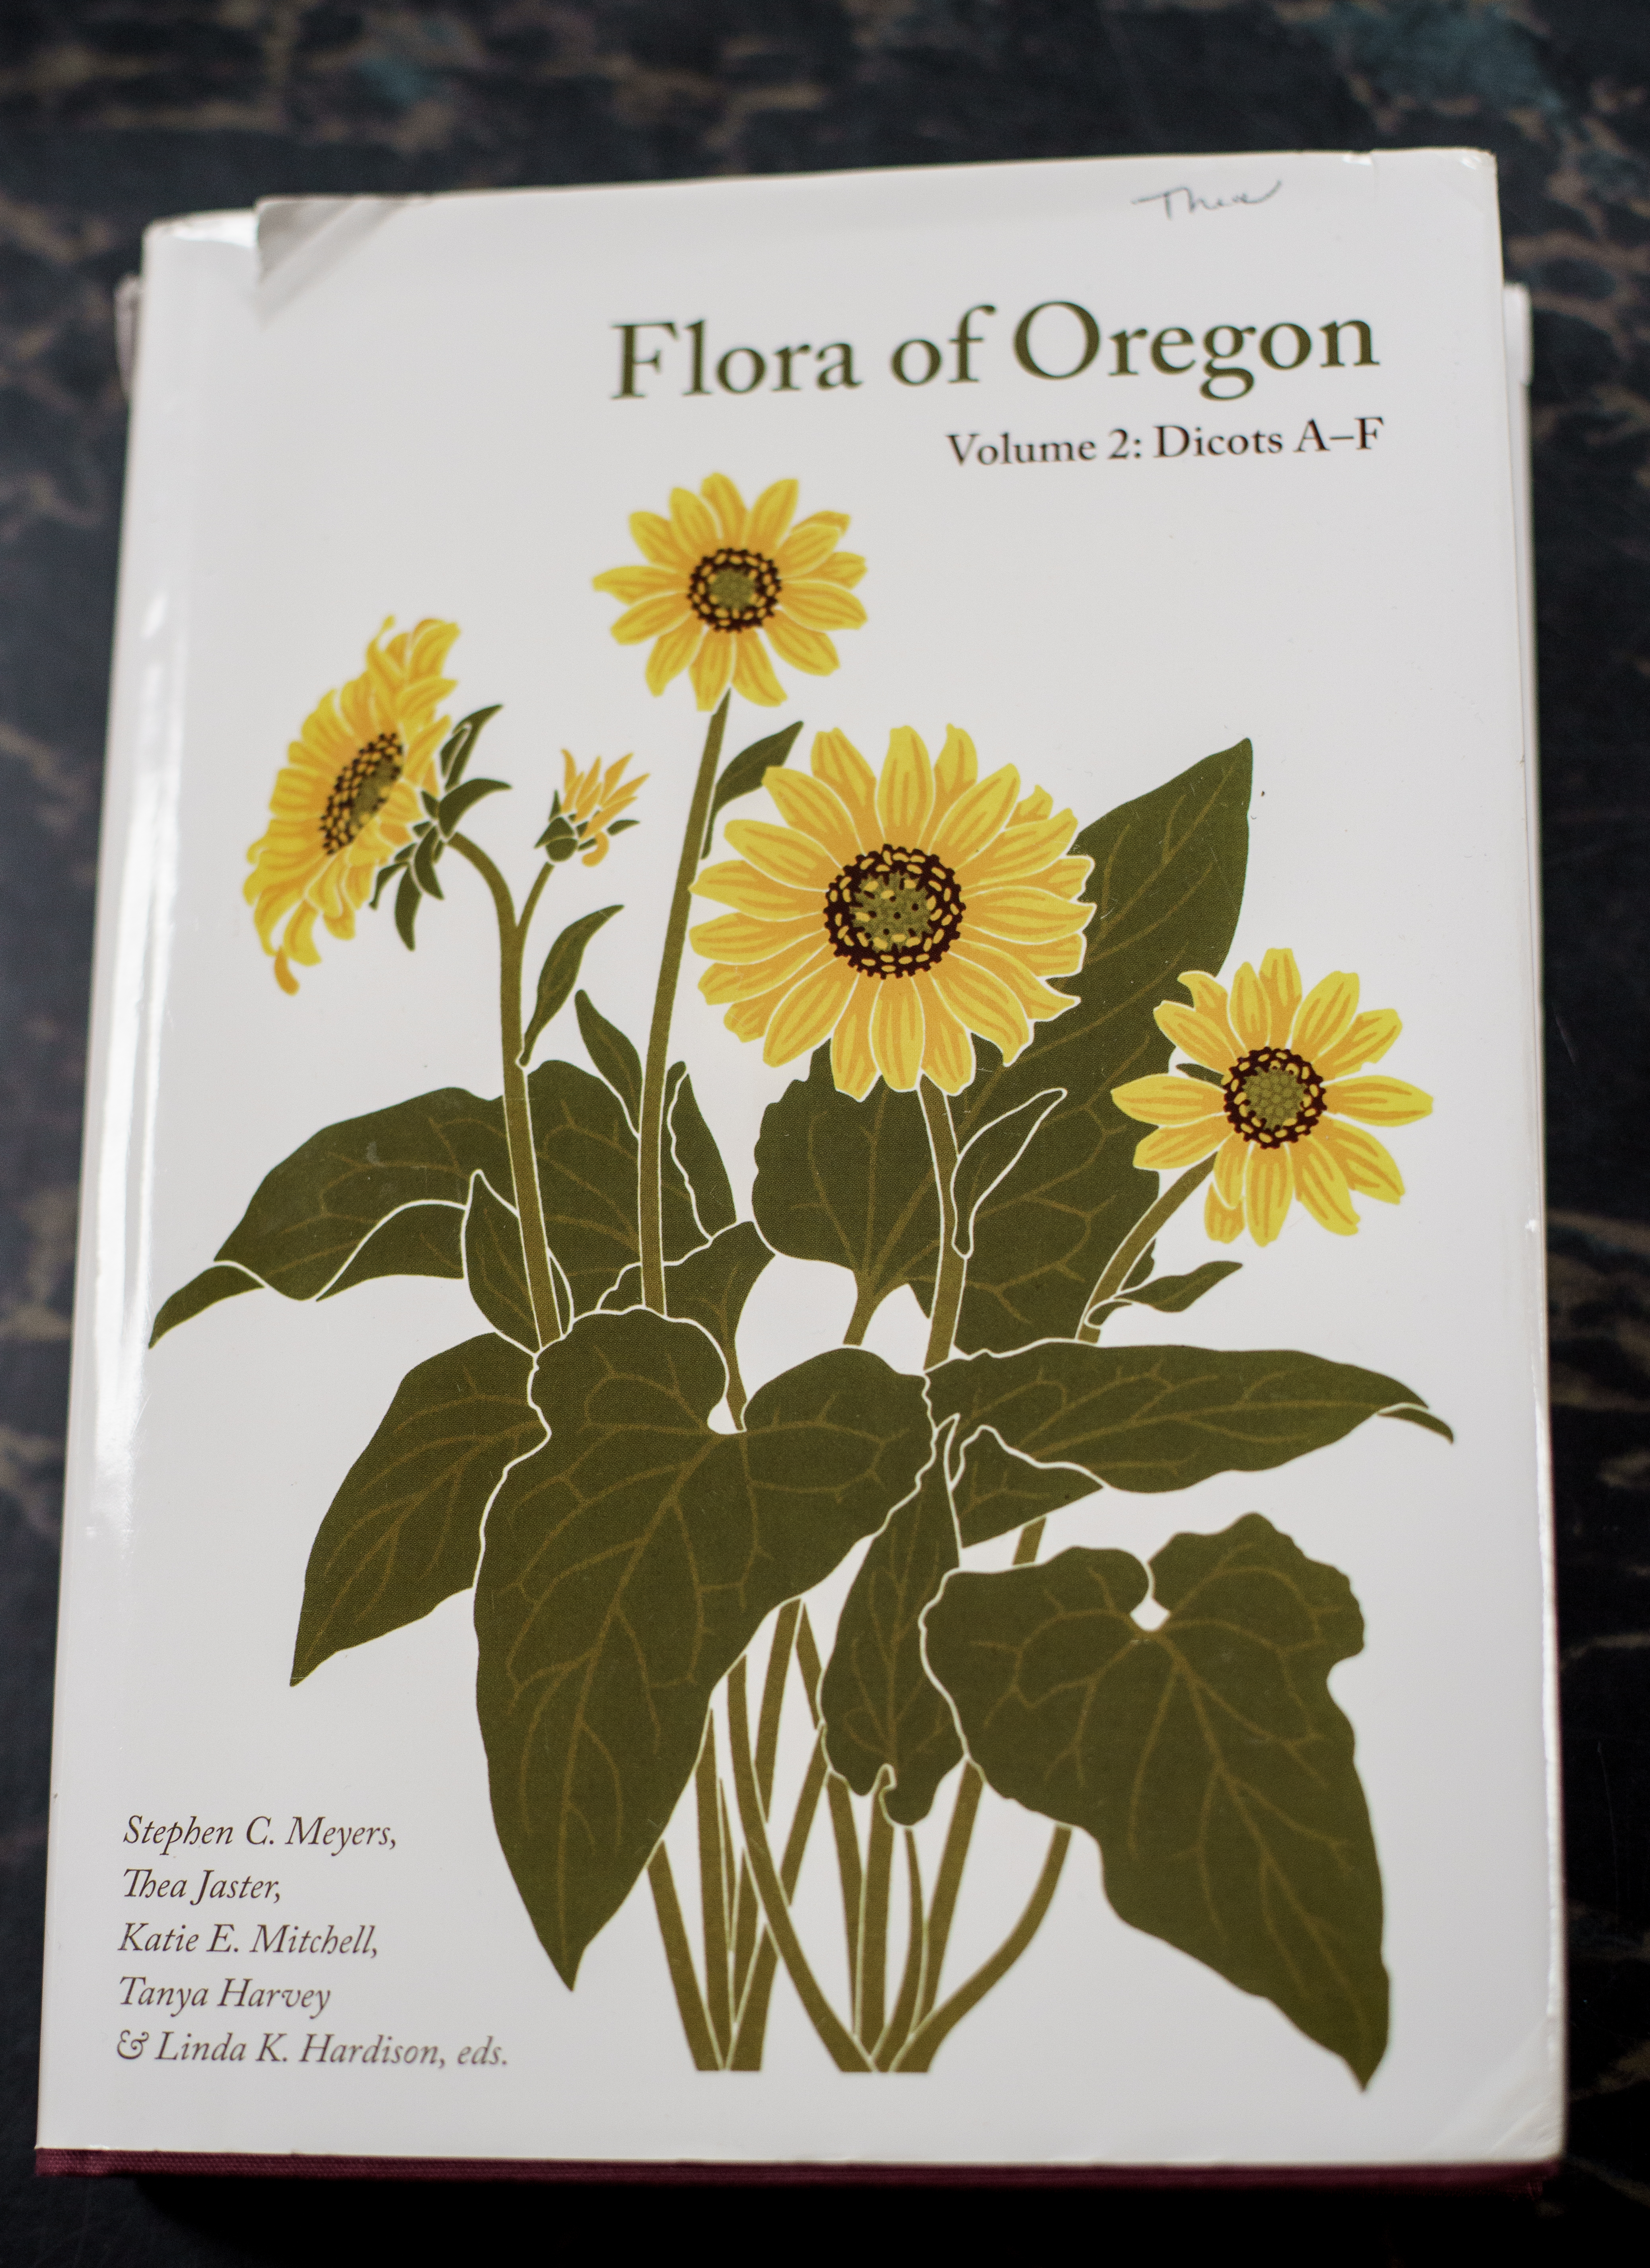 With a small staff and a large network of volunteers, OregonFlora has created a repository of information about plants across Oregon. The project manages oregonflora.org and a wildflowers app, has produced two Flora of Oregon print volumes and is finalizing production on a third volume. Linda Hardison, OregonFlora’s director, leads the effort from Oregon State University in Corvallis.